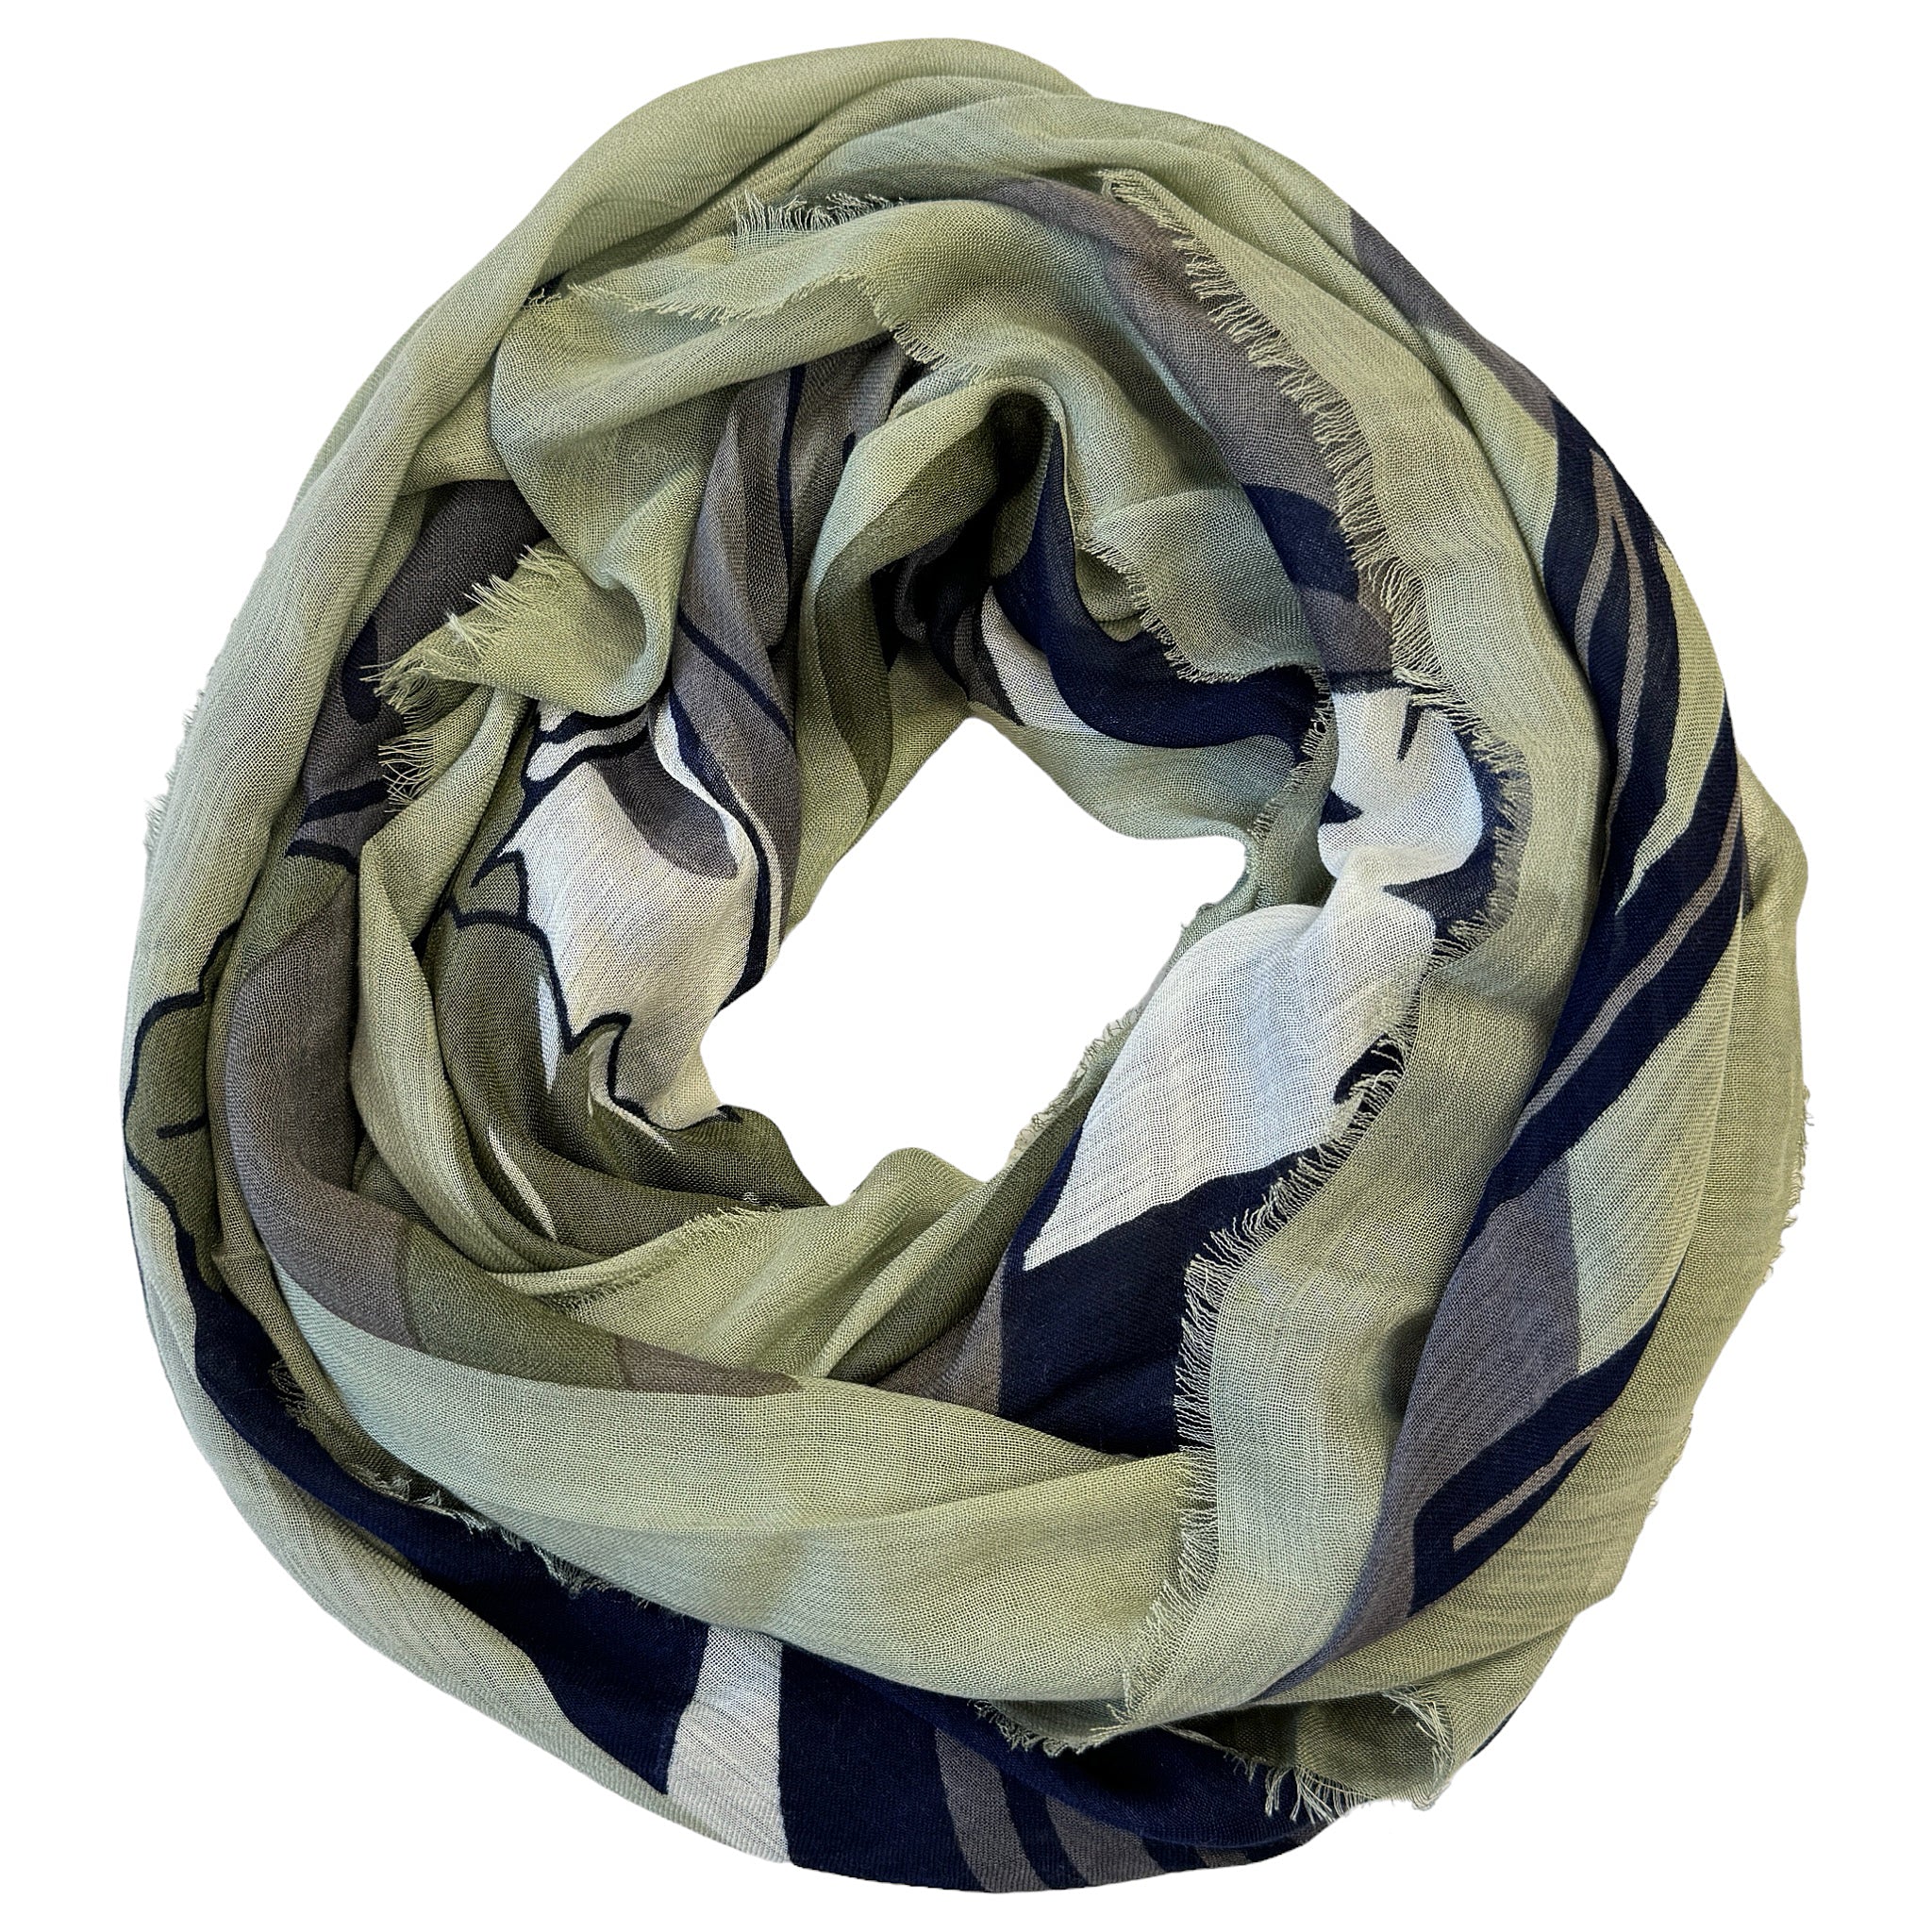 Blue Pacific Micromodal Vintage Vineyard Napa Valley Scarf in Olive Navy and Black